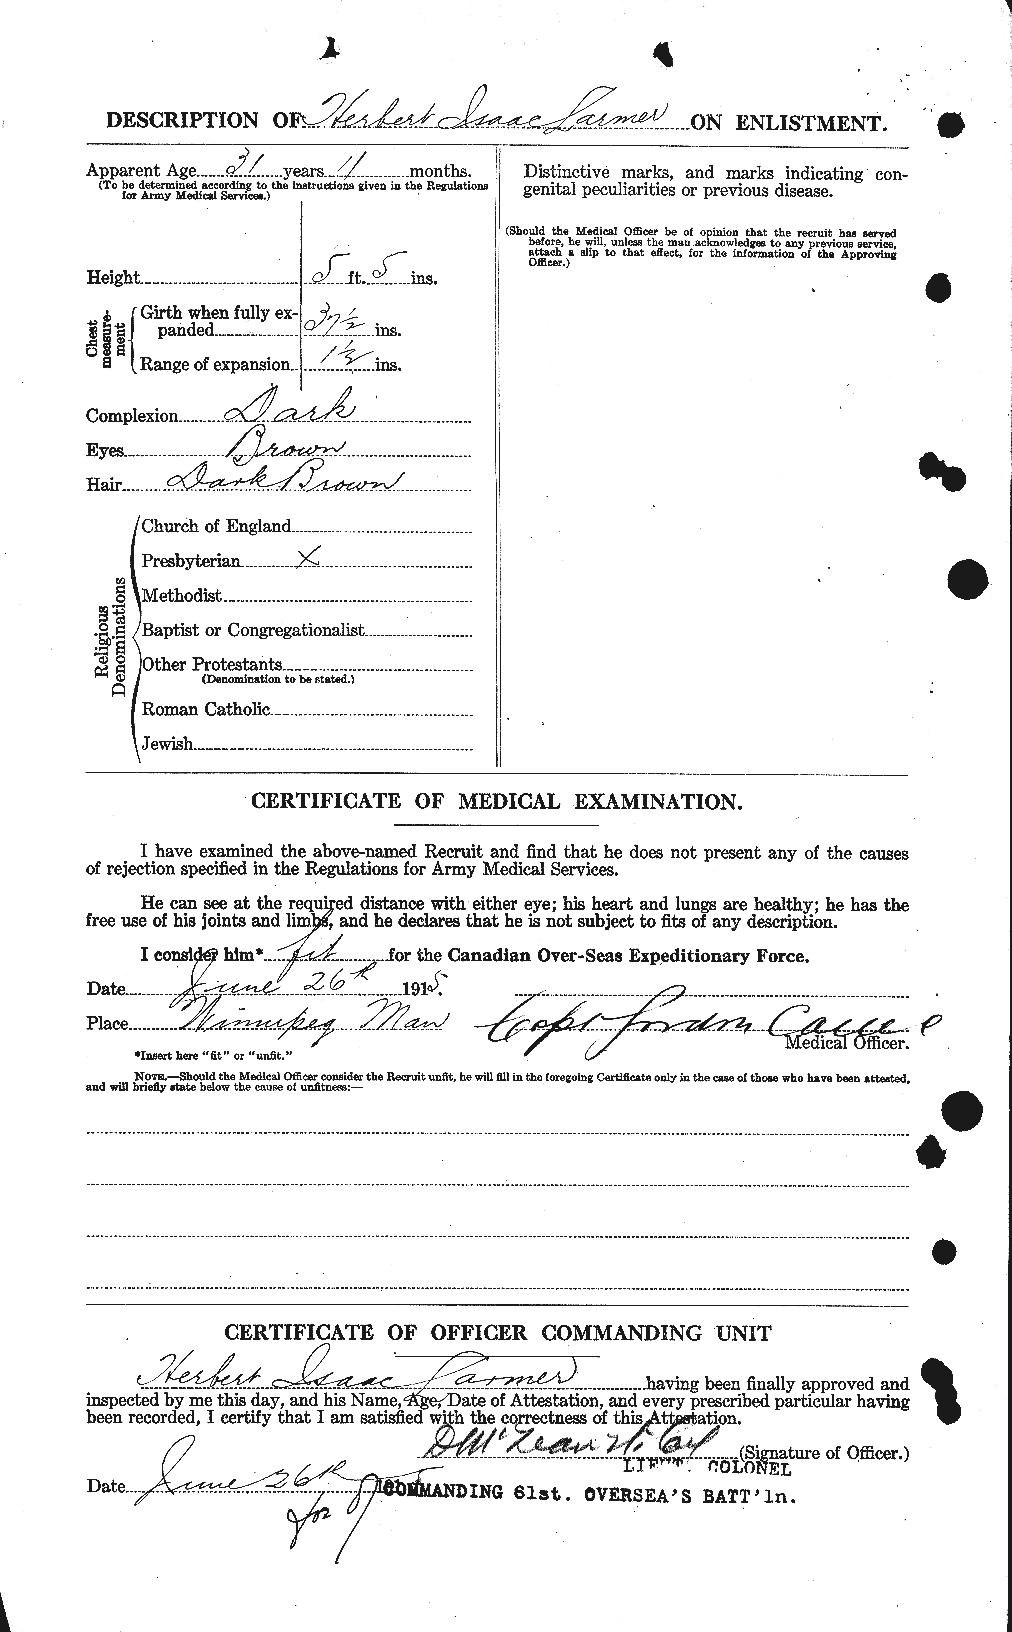 Personnel Records of the First World War - CEF 450638b